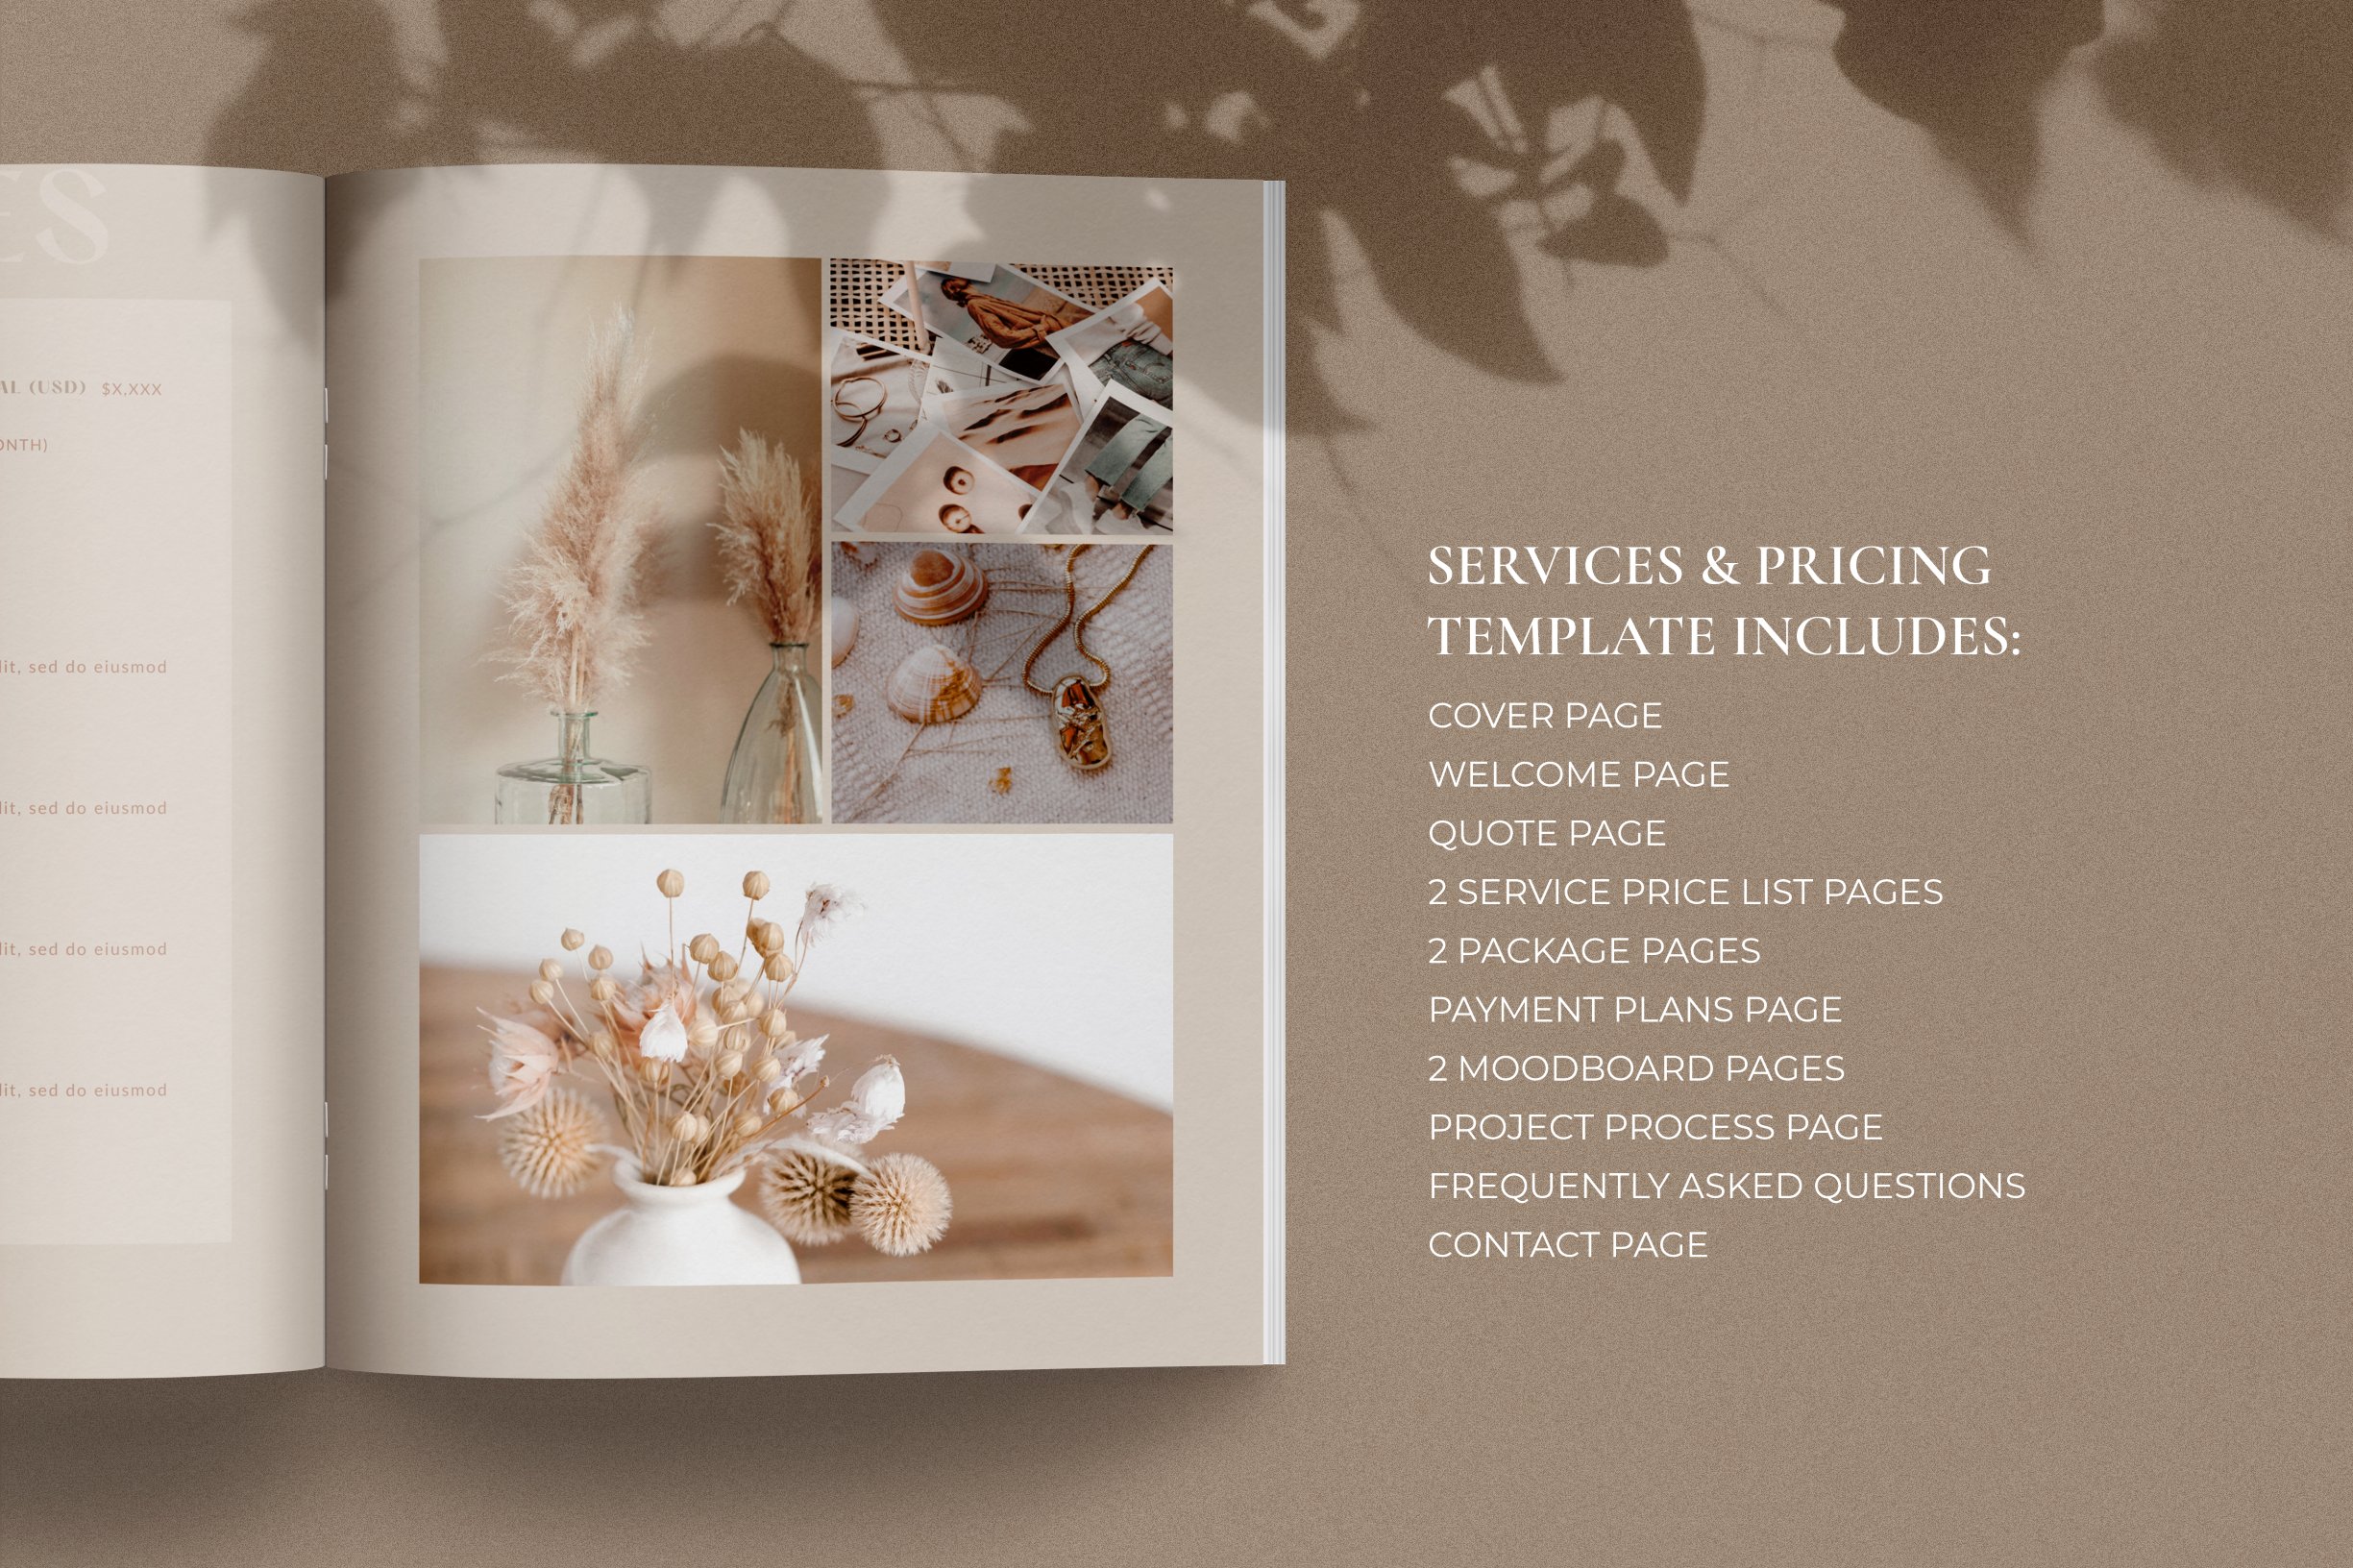 Services and Pricing Guide | Canva preview image.